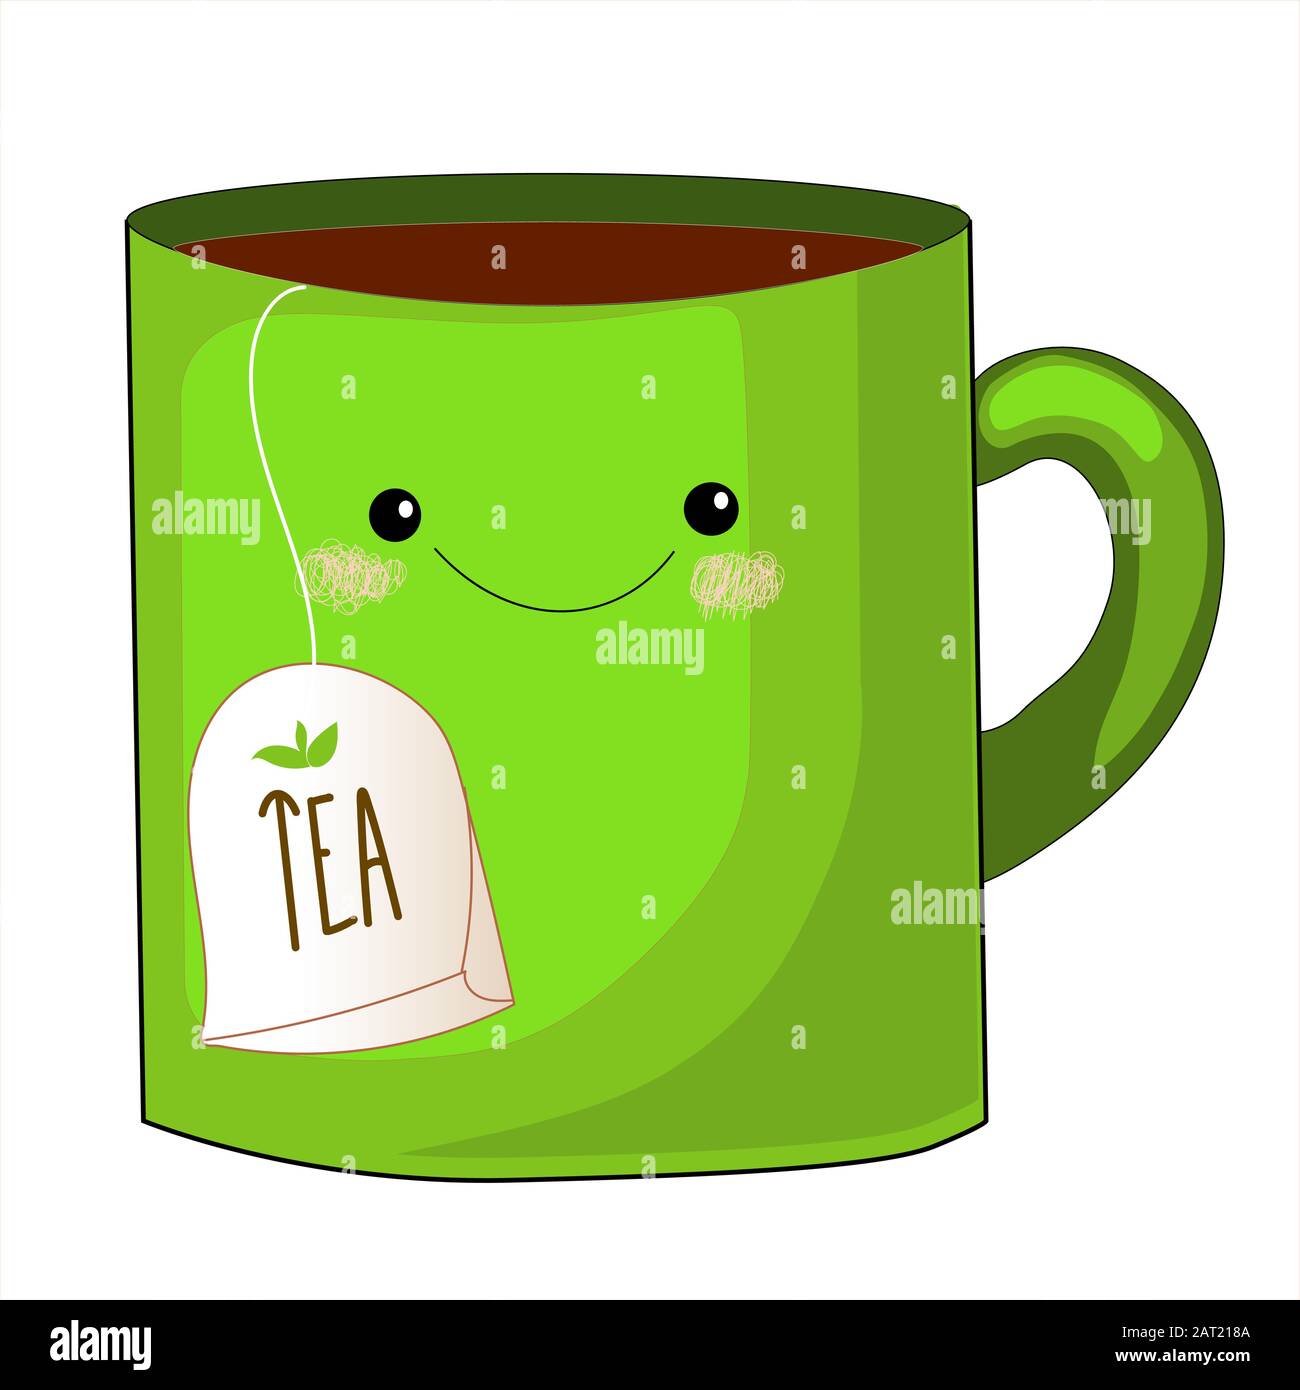 https://c8.alamy.com/comp/2AT218A/cute-tea-cup-charactersweet-teabag-with-cute-faces-emoji-doodle-objectscute-tea-bag-set-cup-emoji-set-with-cheeks-and-eyes-colored-beautiful-2AT218A.jpg